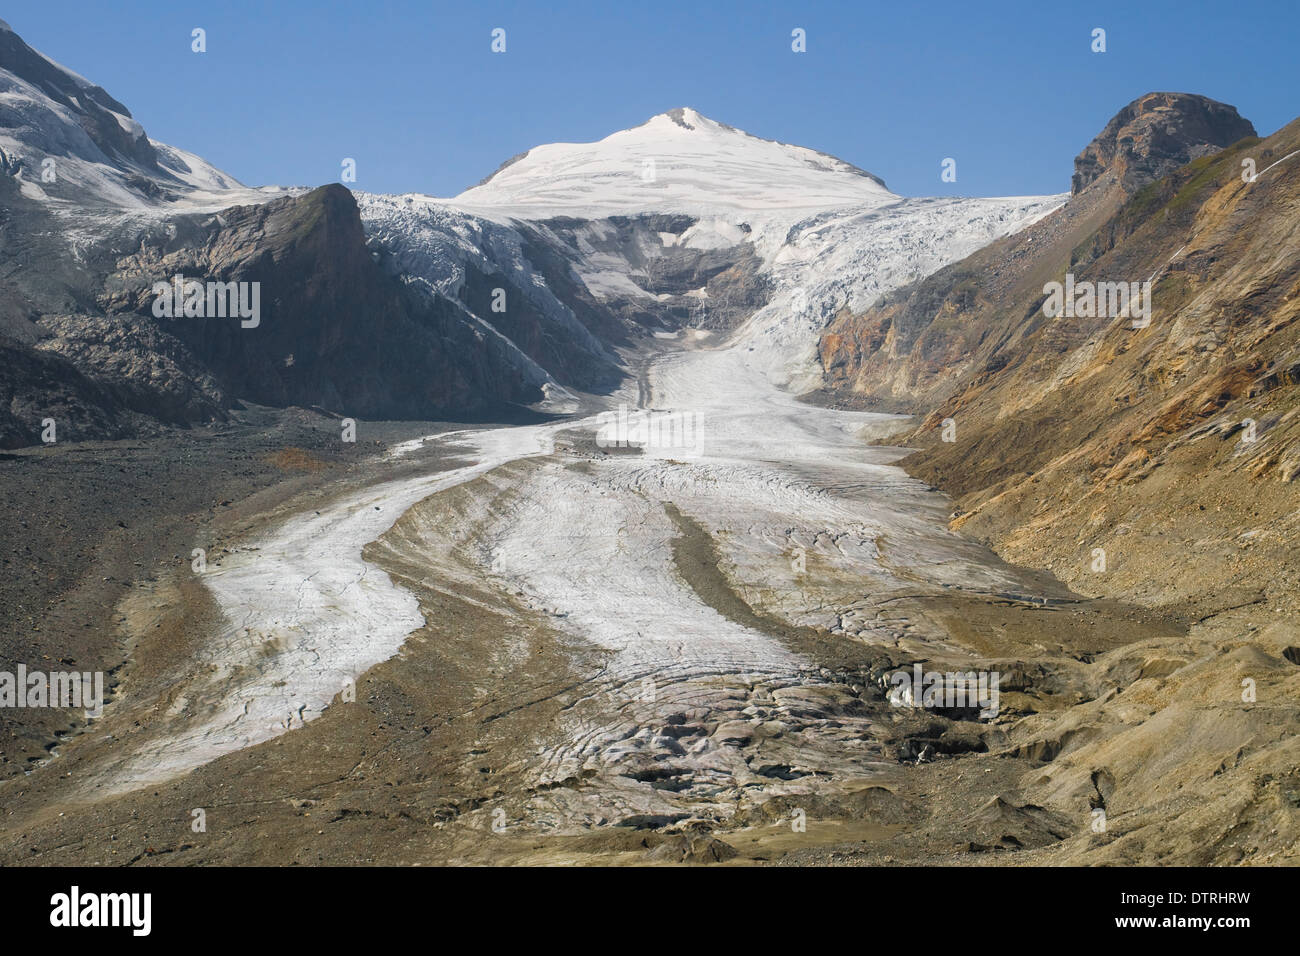 Johannisberg summit and Pasterze glacier in the Hohe Tauern National Park, Austria. Stock Photo